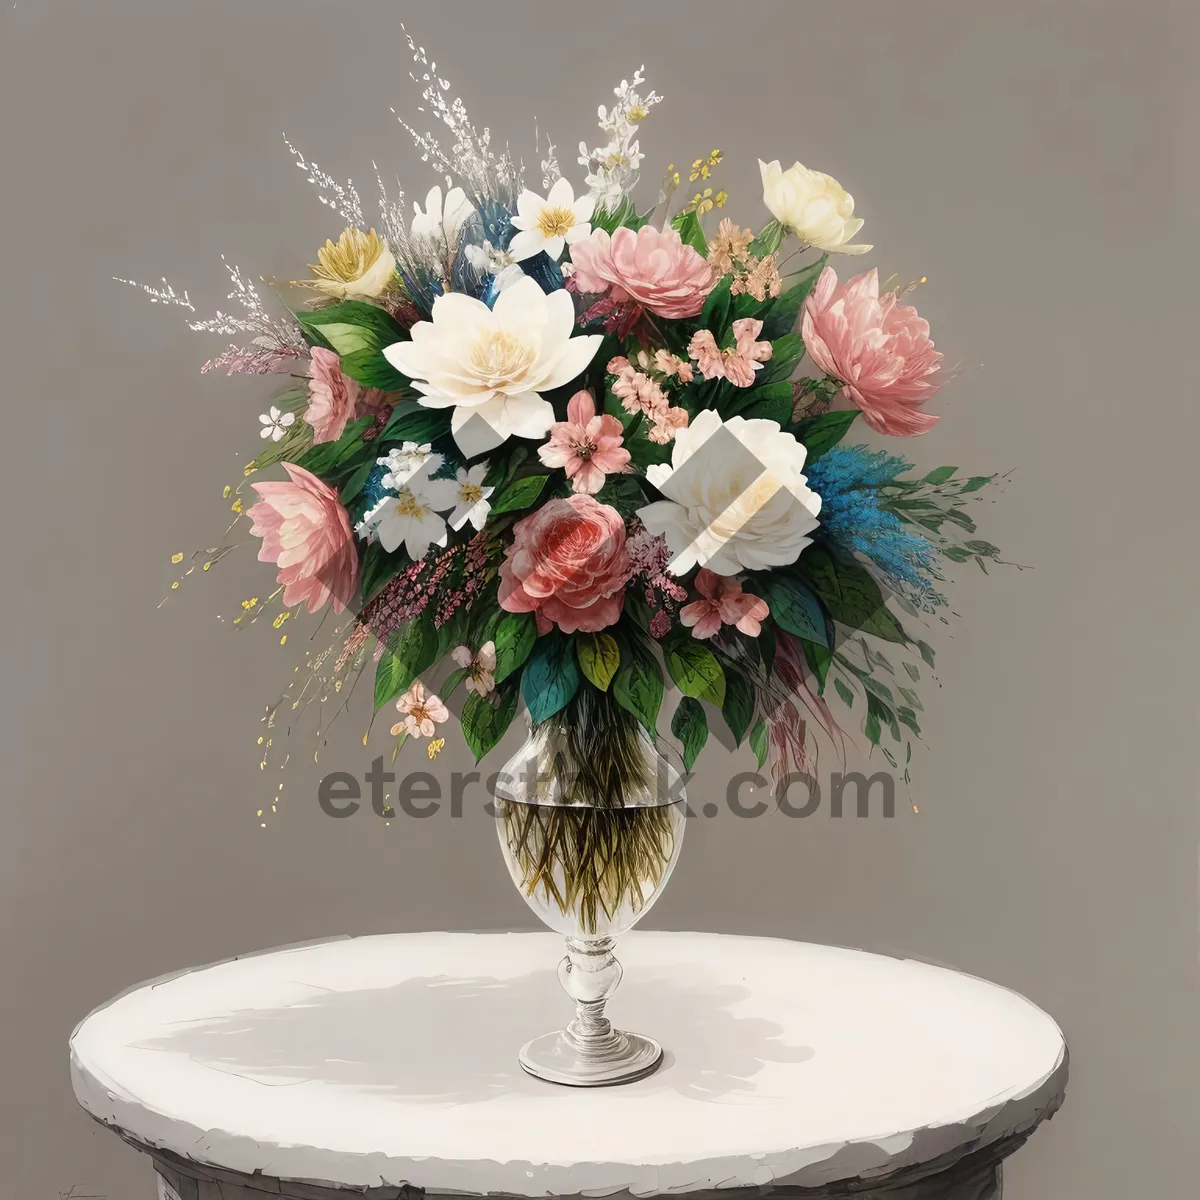 Picture of Romantic Wedding Bouquet in Glass Vase